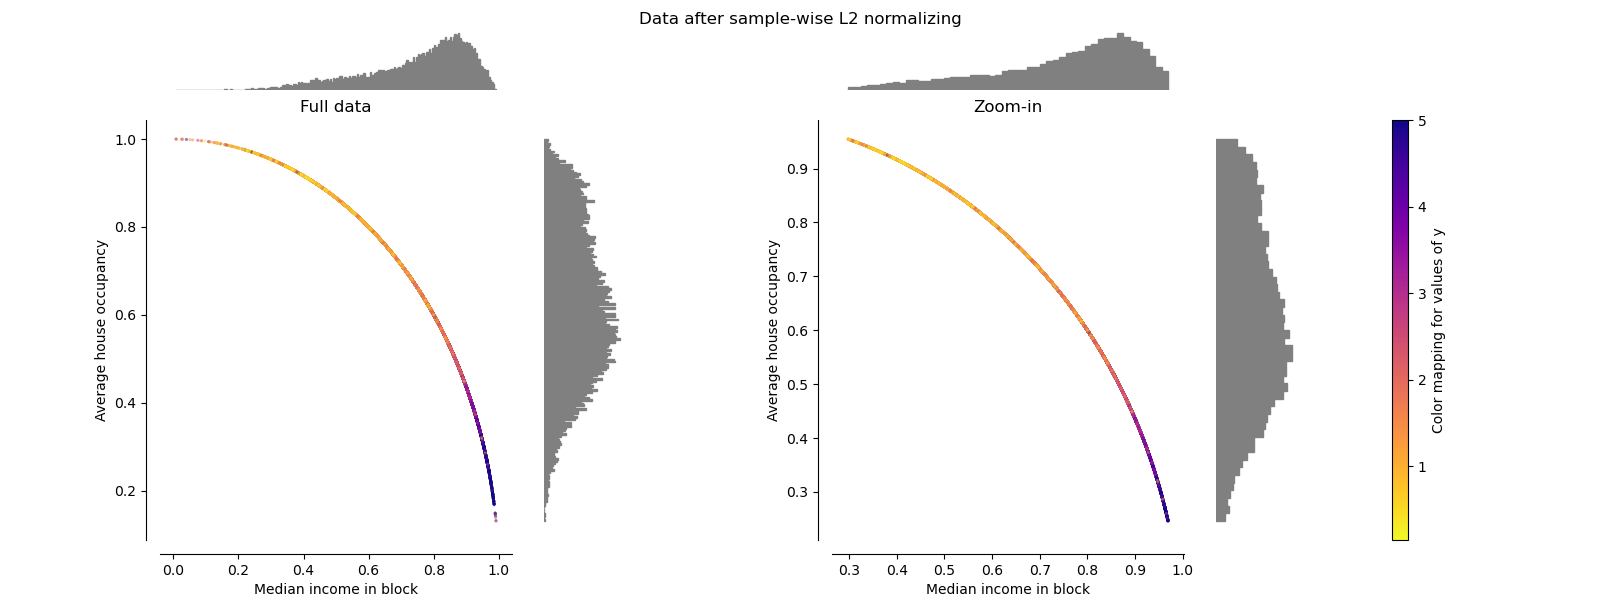 Data after sample-wise L2 normalizing, Full data, Zoom-in